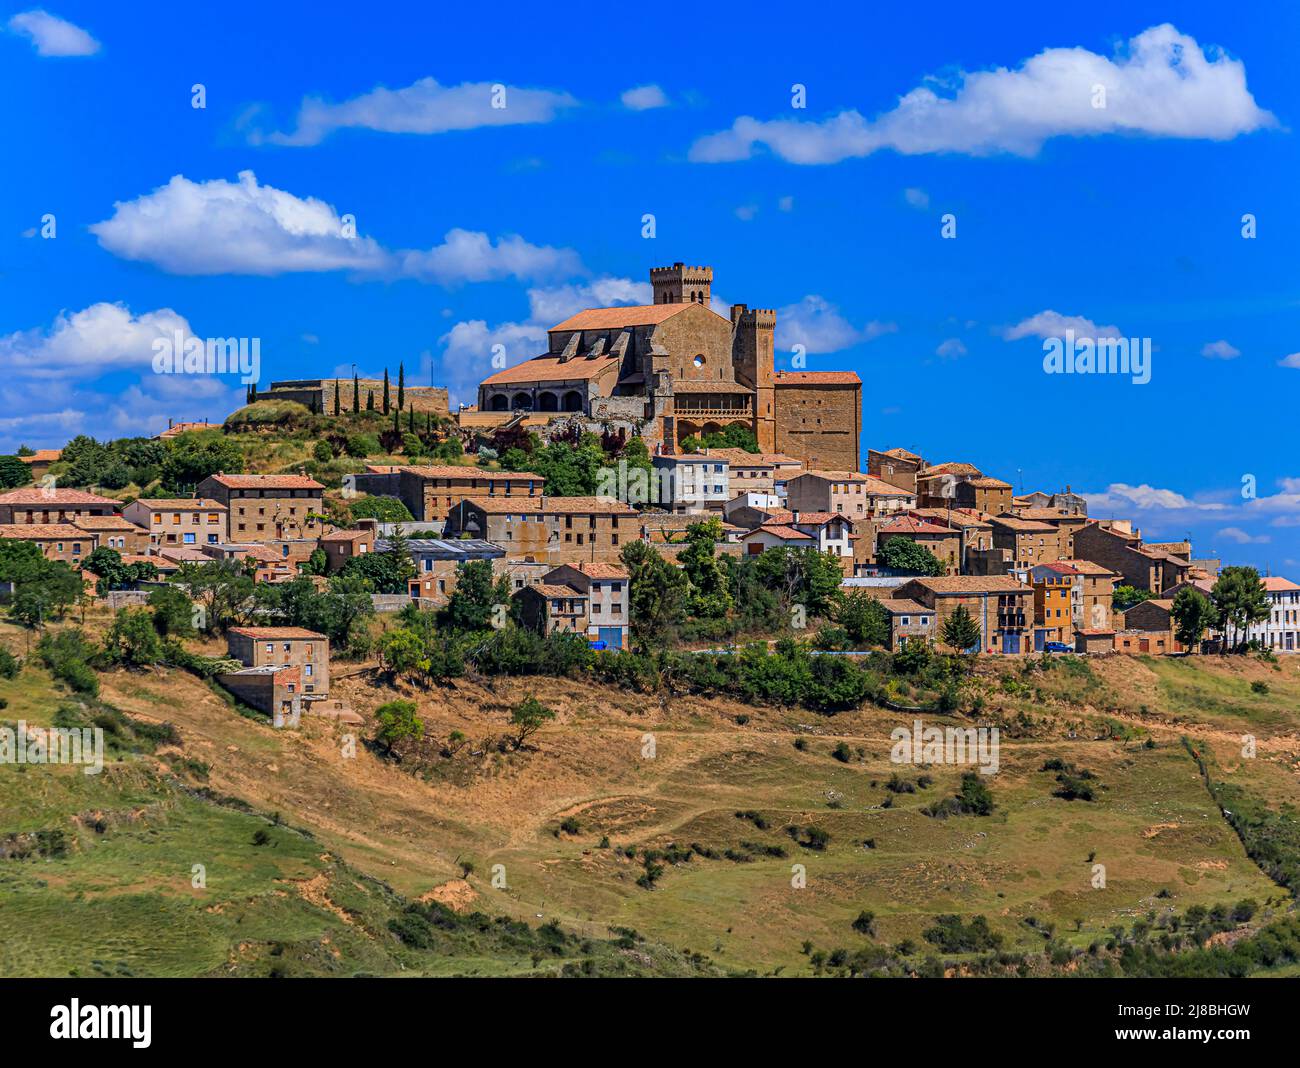 Picturesque view of the hilltop medieval village of Ujue in Navarra, northern Spain on ancient pilgrim route Camino de Santiago or Way of St James Stock Photo